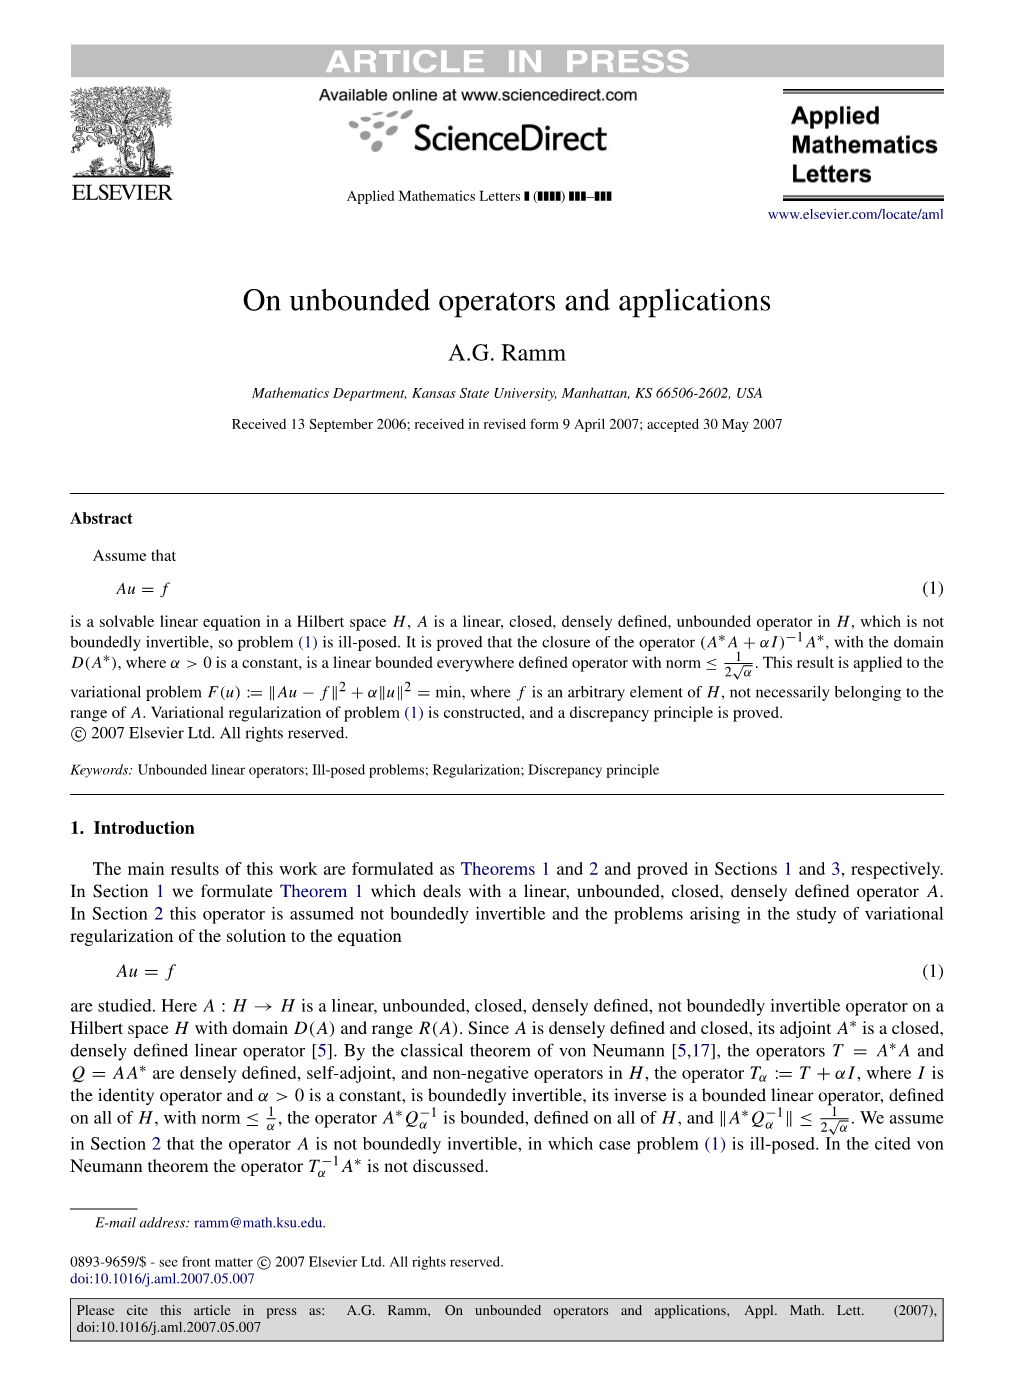 On Unbounded Operators and Applications